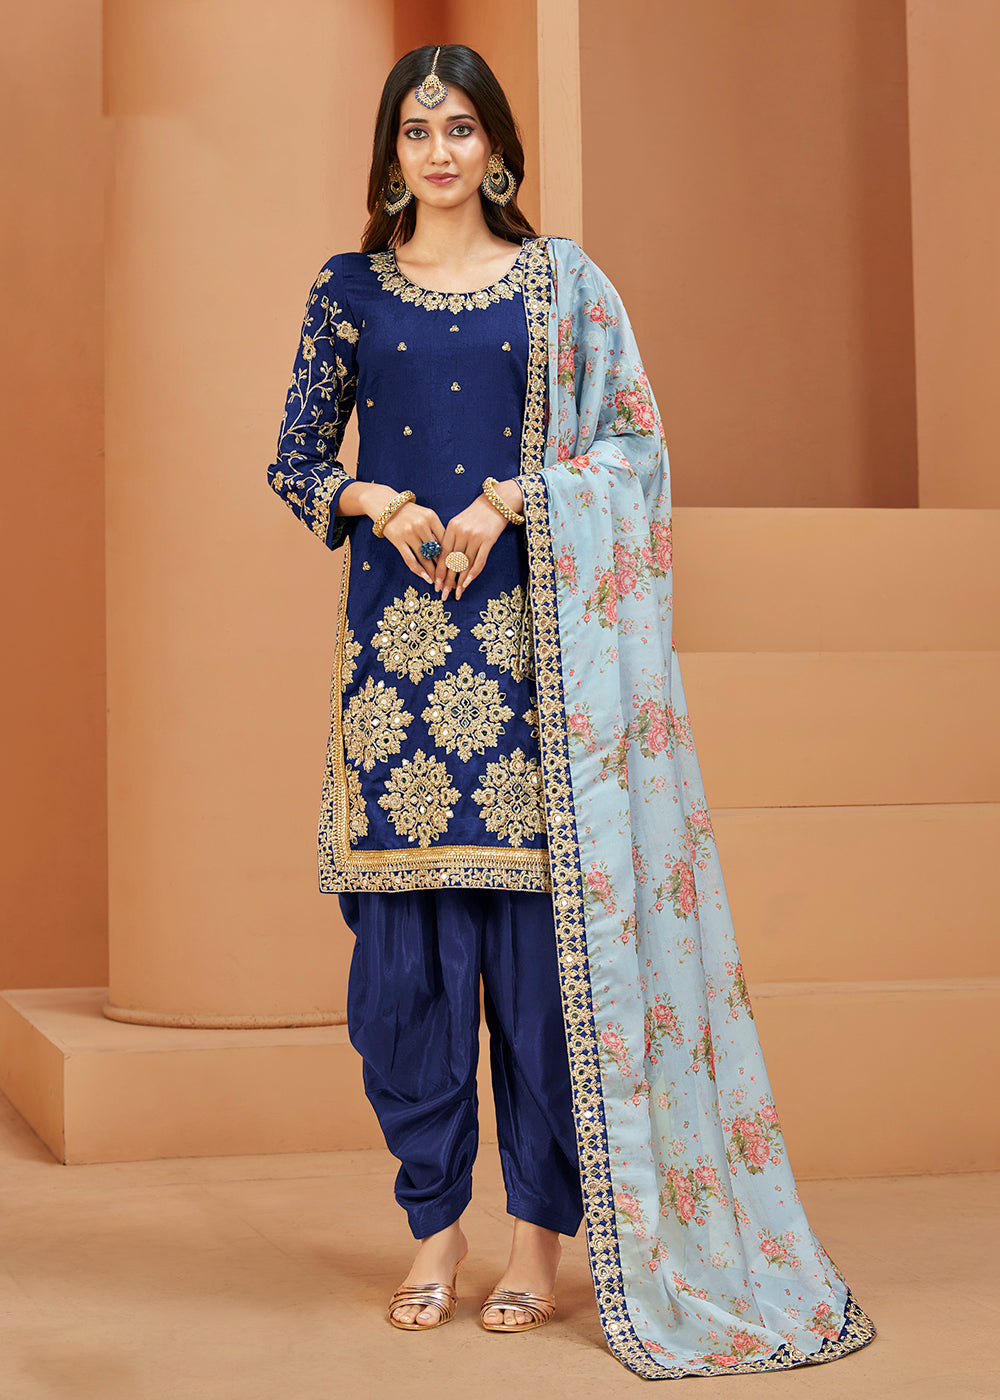 Buy Now Charming Art Silk Blue Mirror Embroidered Patiala Salwar Kameez Online in USA, UK, Canada, Germany, Australia & Worldwide at Empress Clothing.